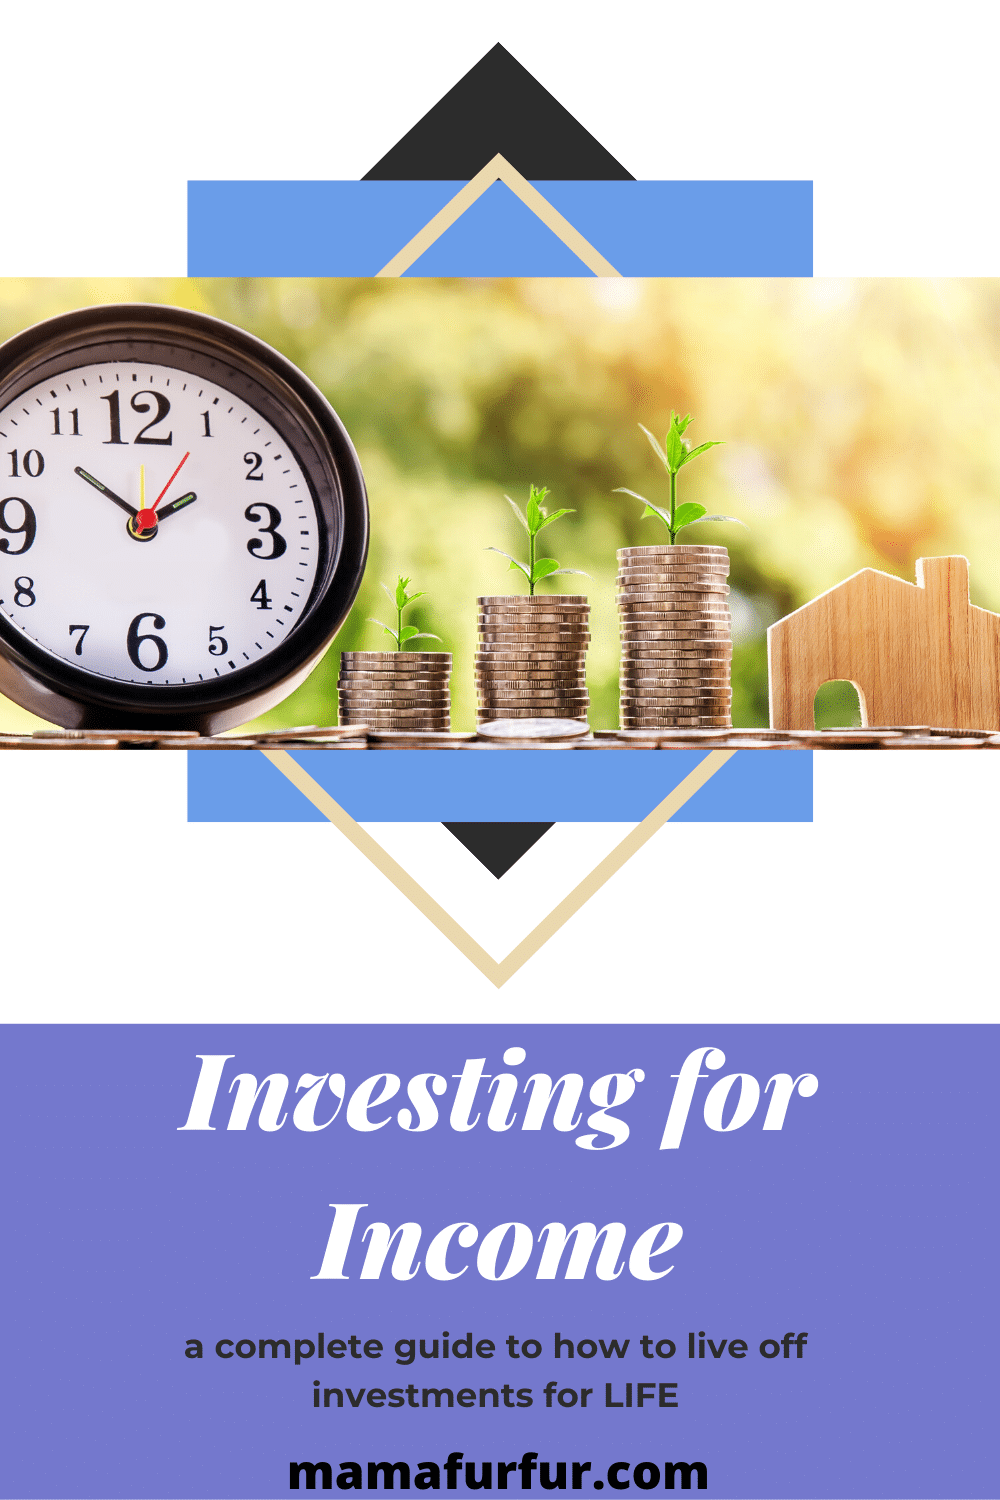 Investing for Income - How to Live off Investments & Dividends for LIFE